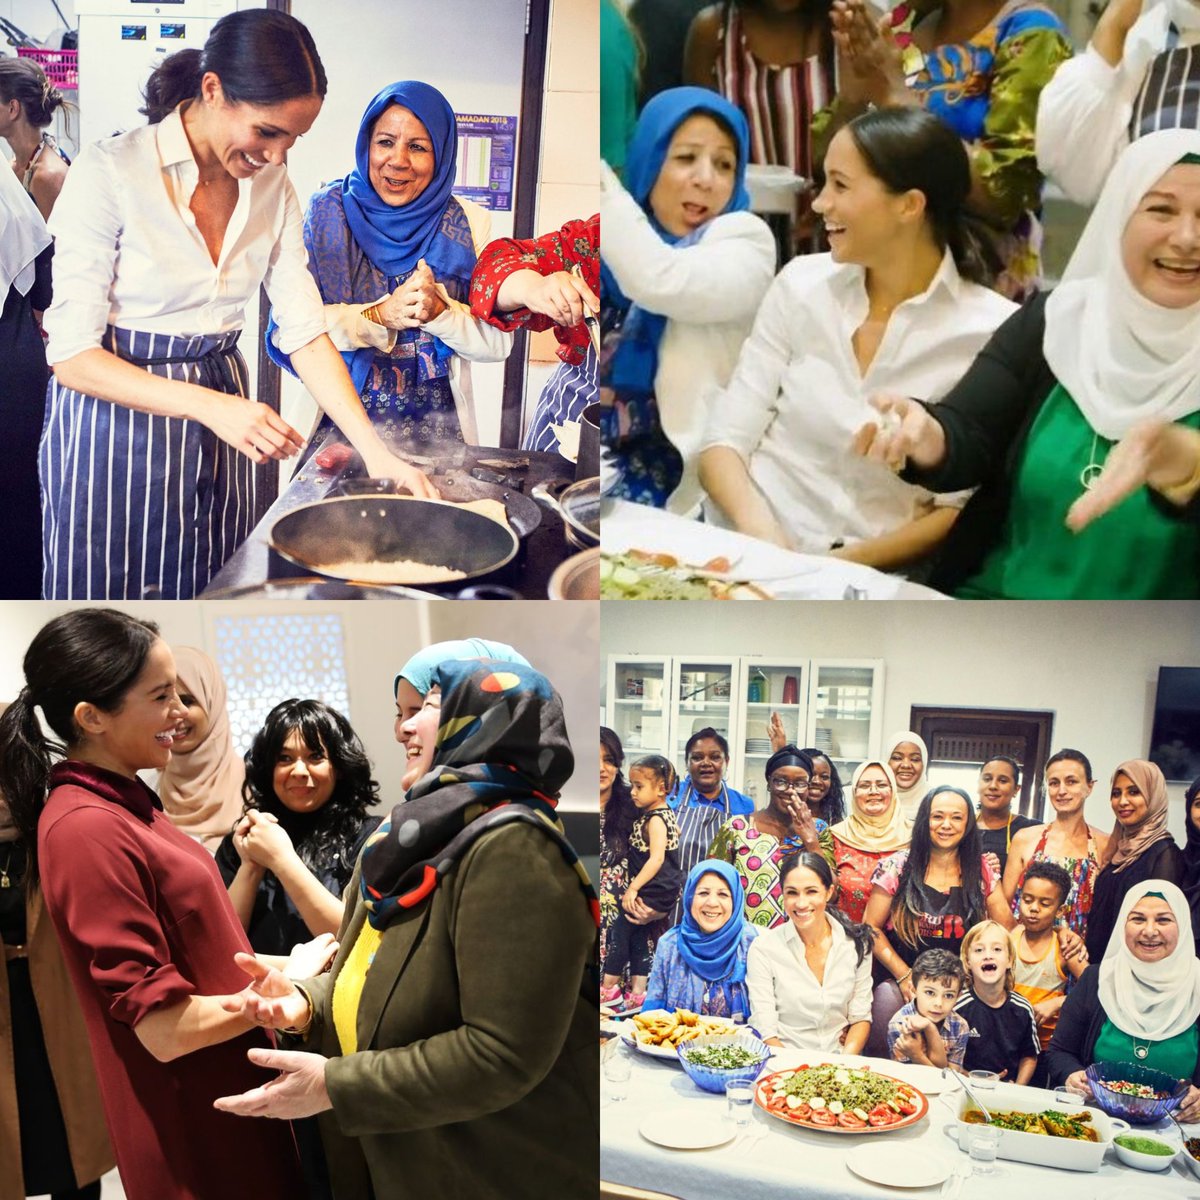 You know who I want as guests on Meghan's cooking show ? These amazing women of the hub community kitchen she has worked with before to keep feeding the grenfell tragedy victims for free 🤍